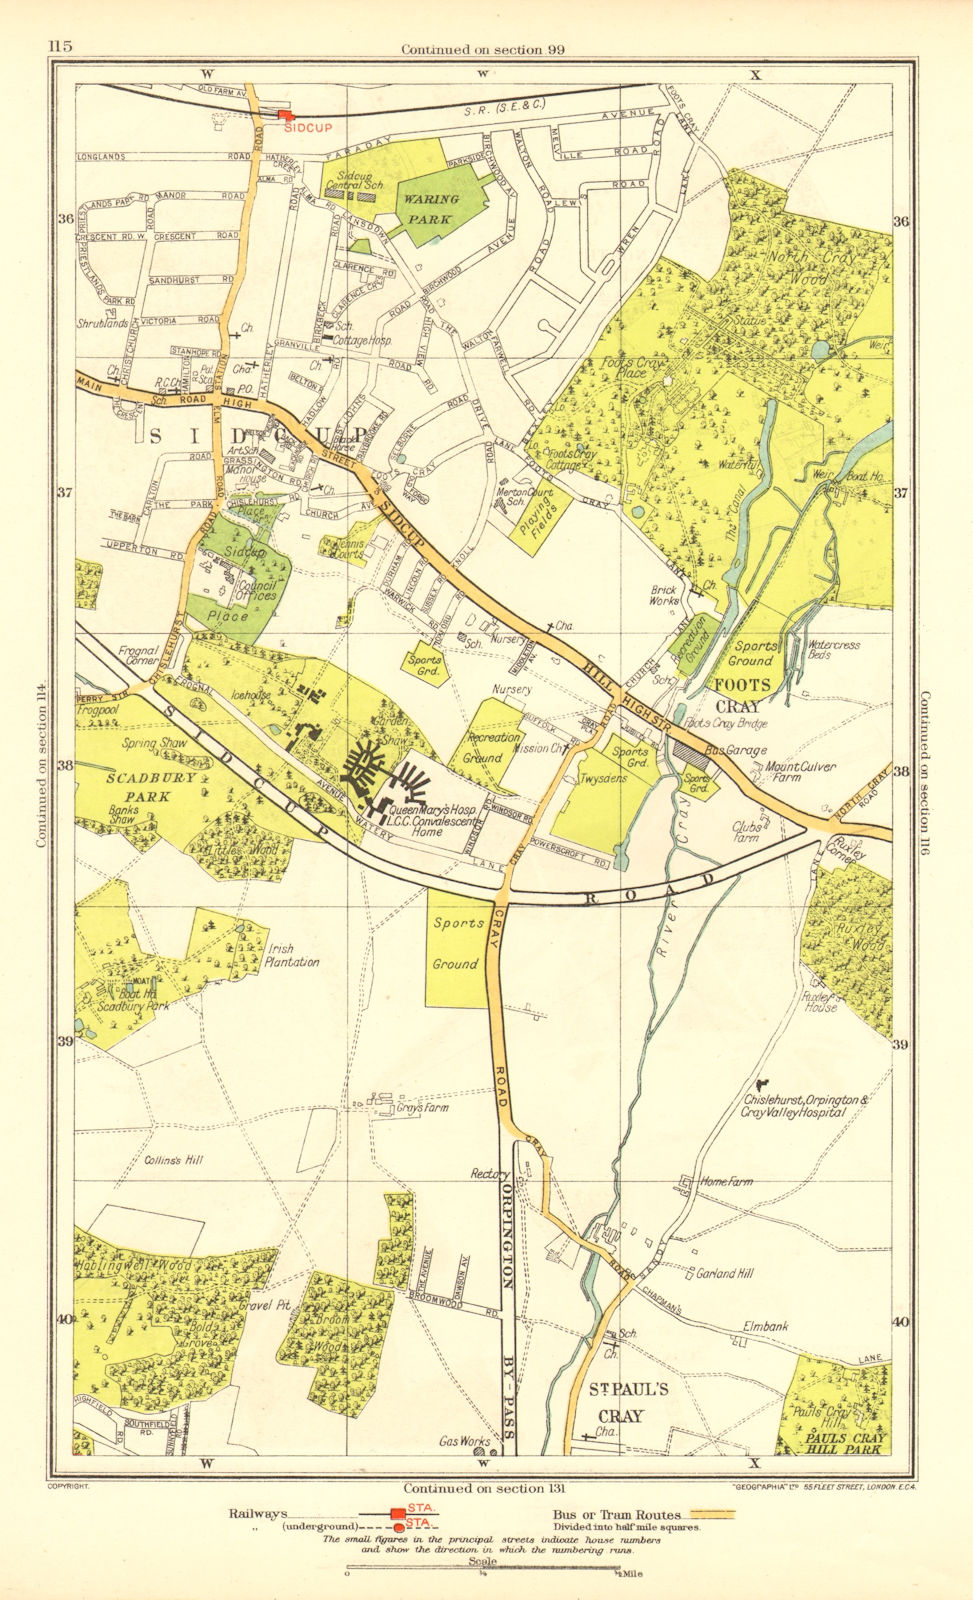 Associate Product SIDCUP. Foots Cray St Paul's Cray Queen's Hospital Frognal(Q Mary's) 1937 map